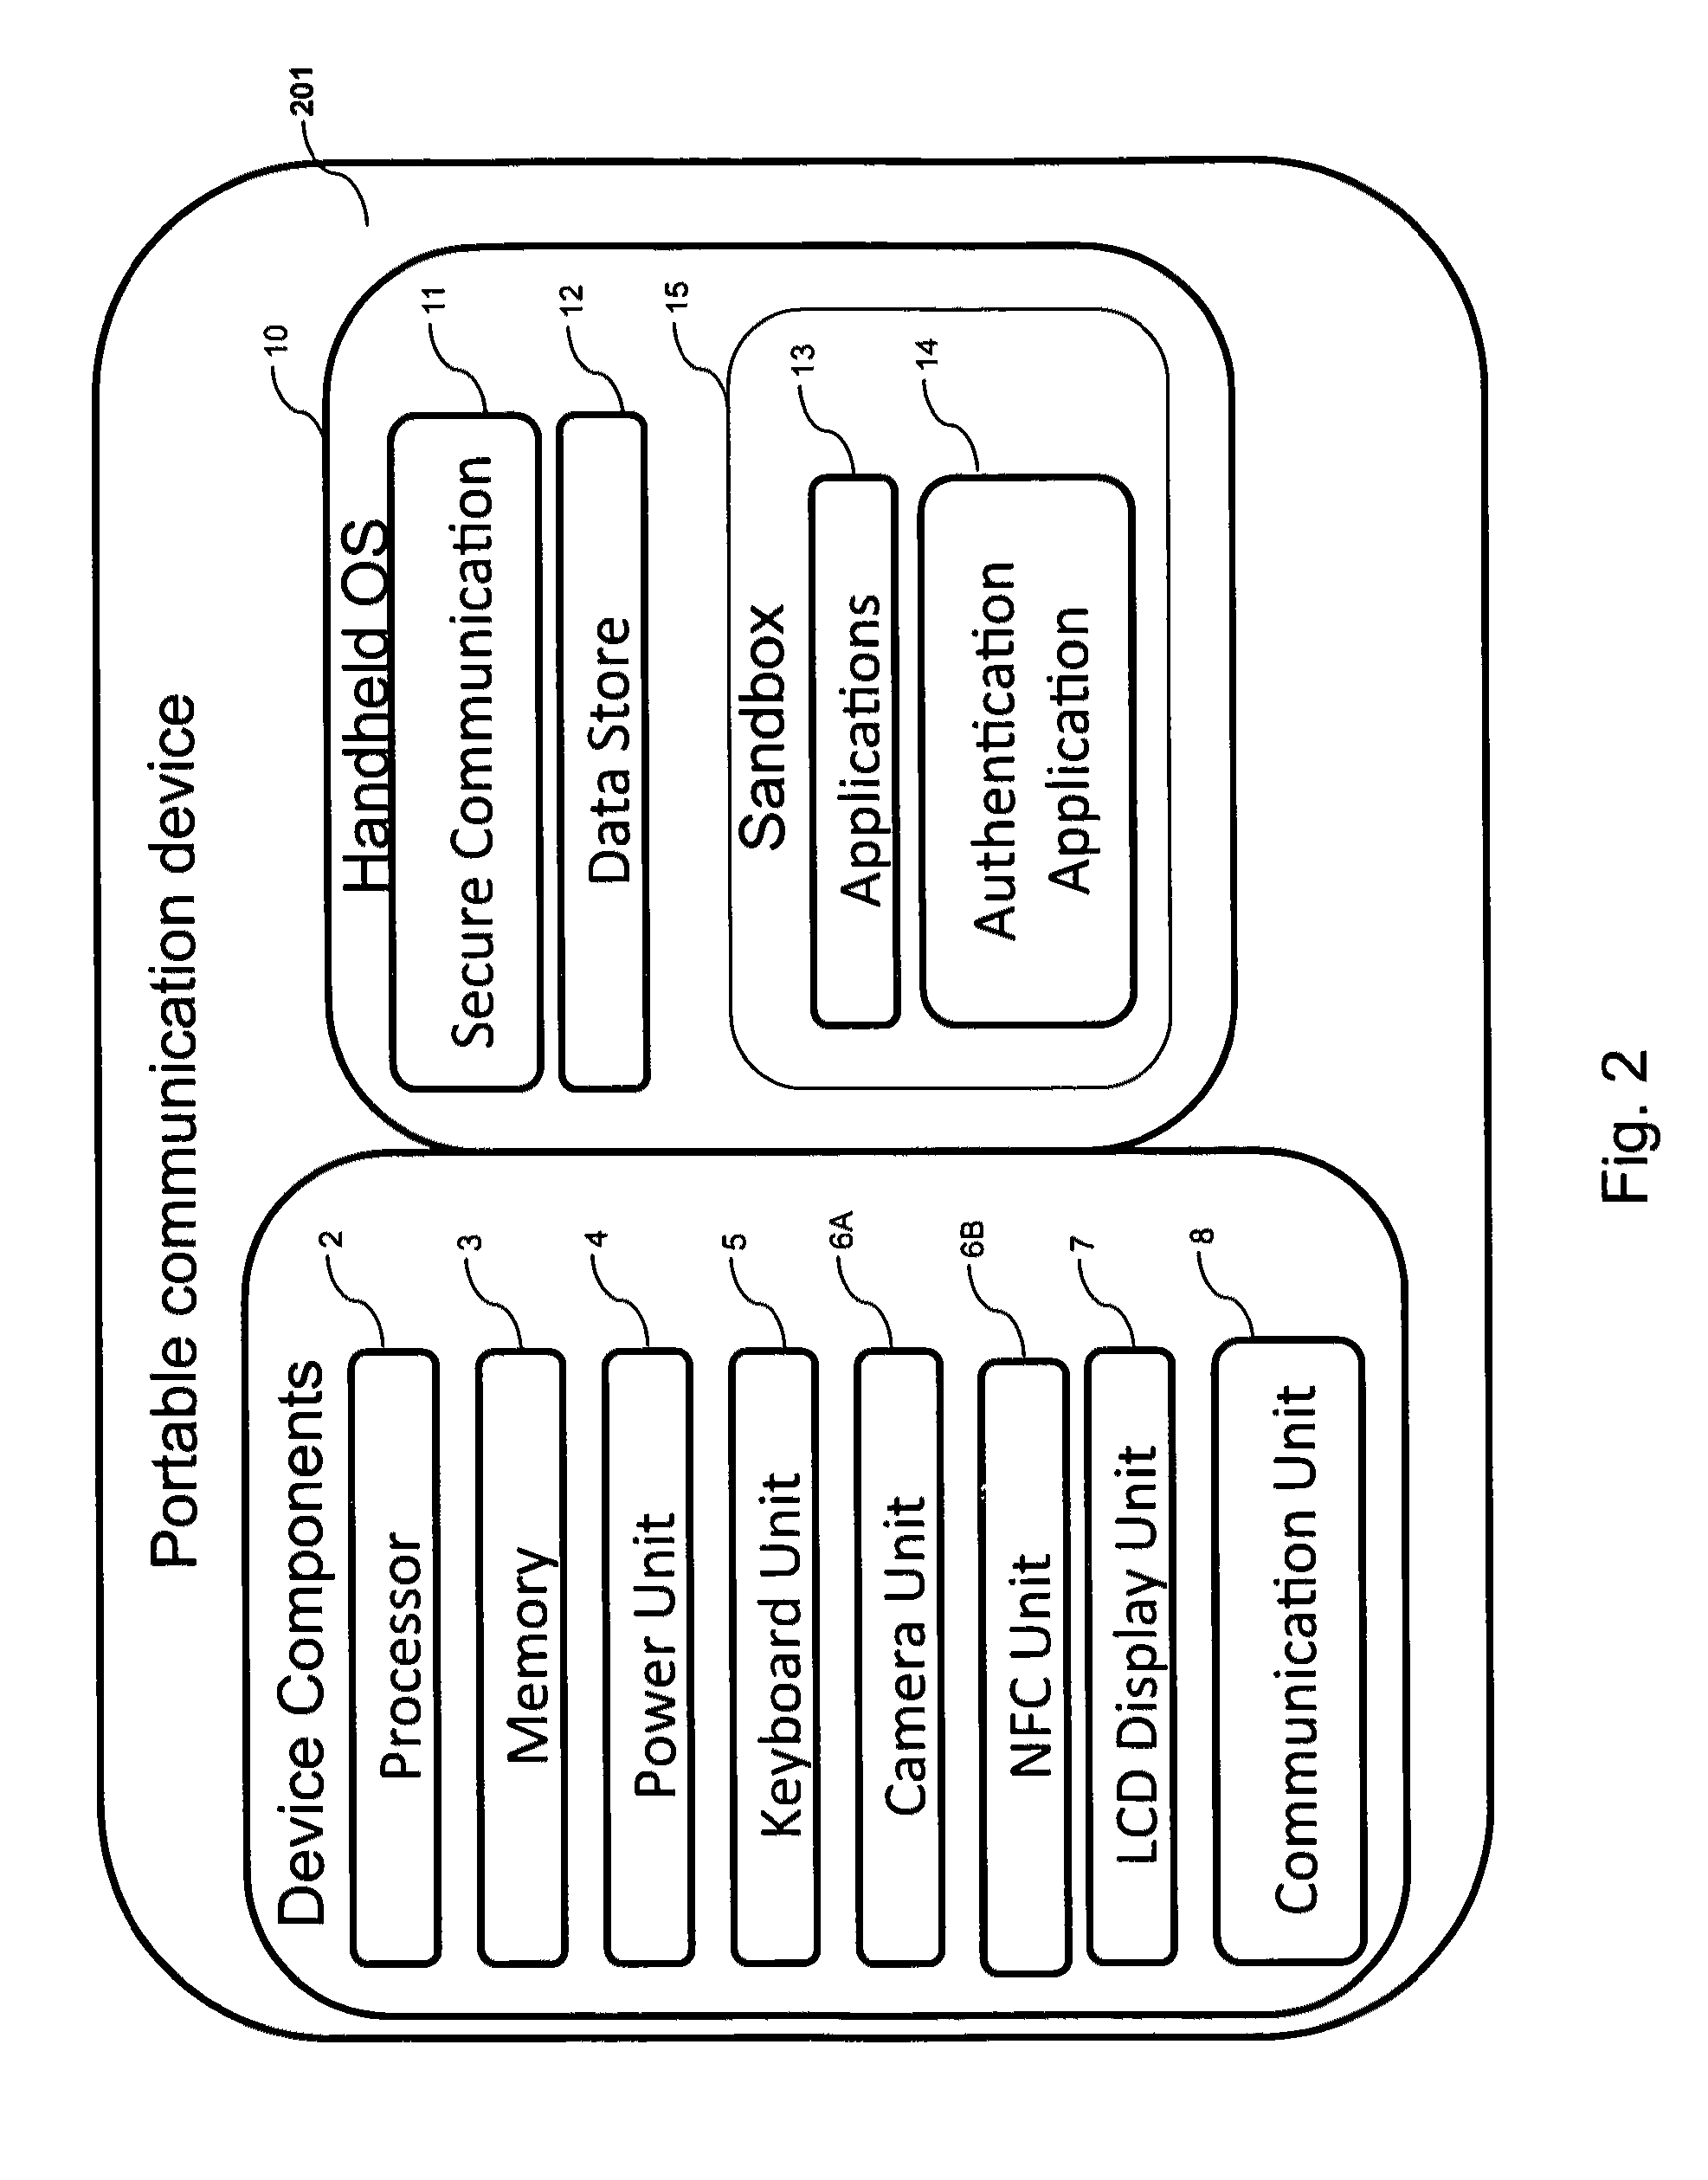 System, design and process for strong authentication using bidirectional OTP and out-of-band multichannel authentication